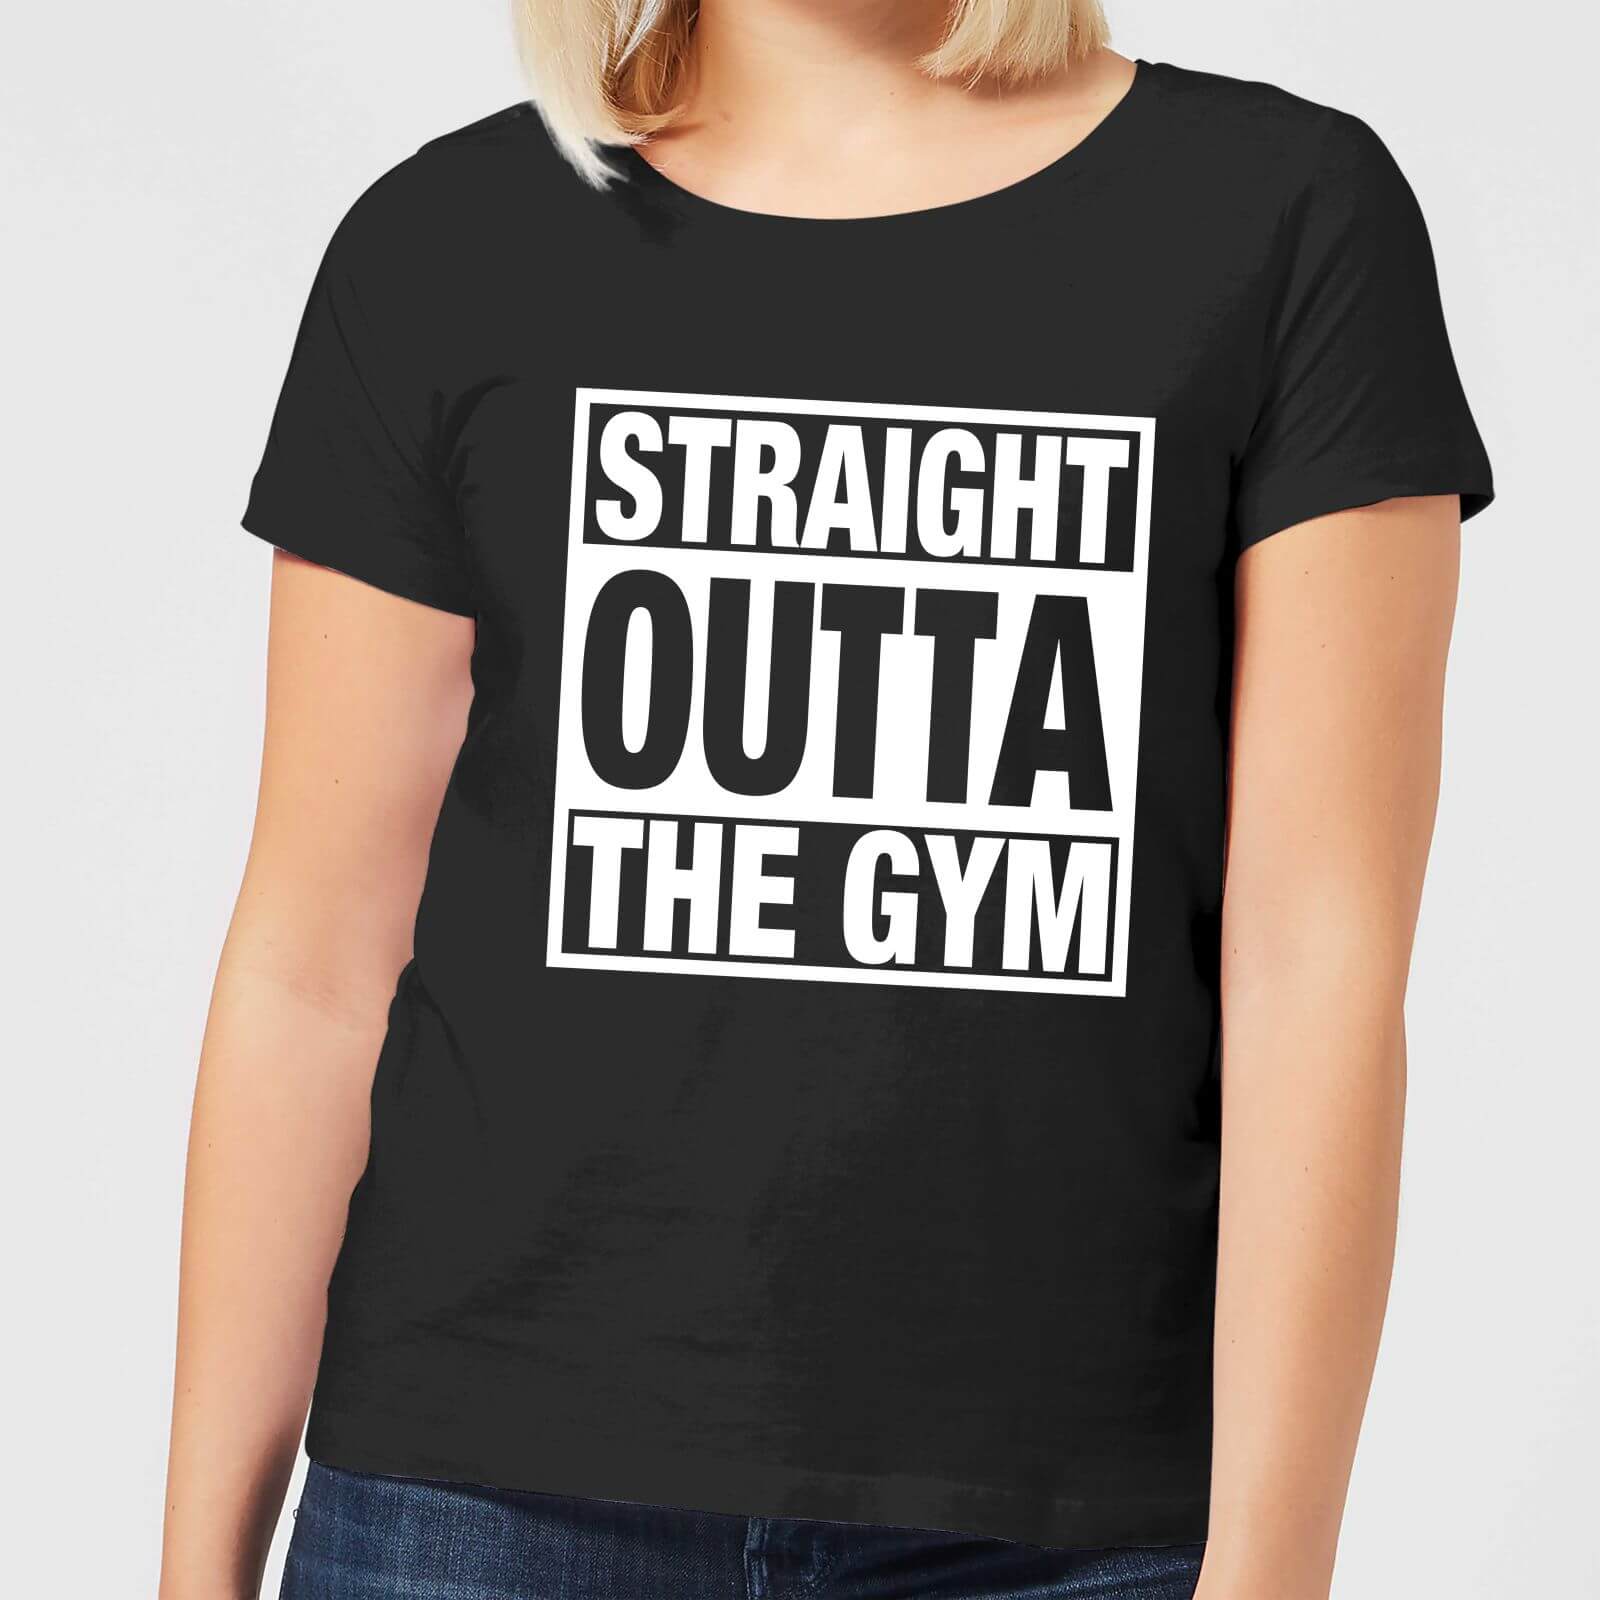 By Iwoot Straight outta the gym women's t-shirt - black - 5xl - black